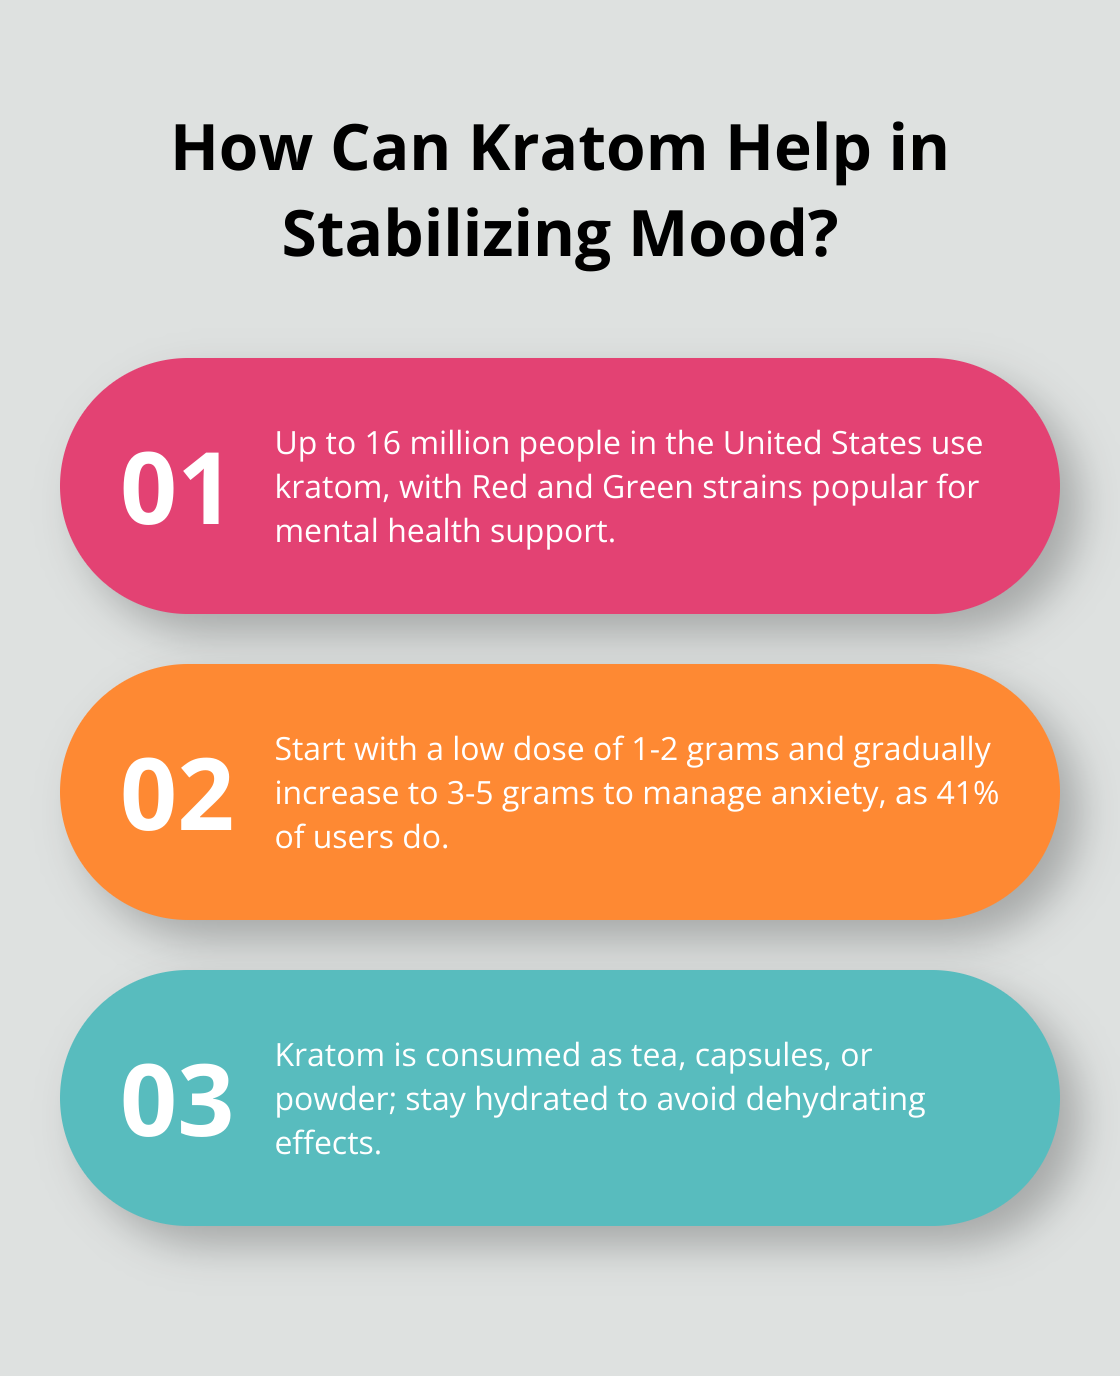 Fact - How Can Kratom Help in Stabilizing Mood?